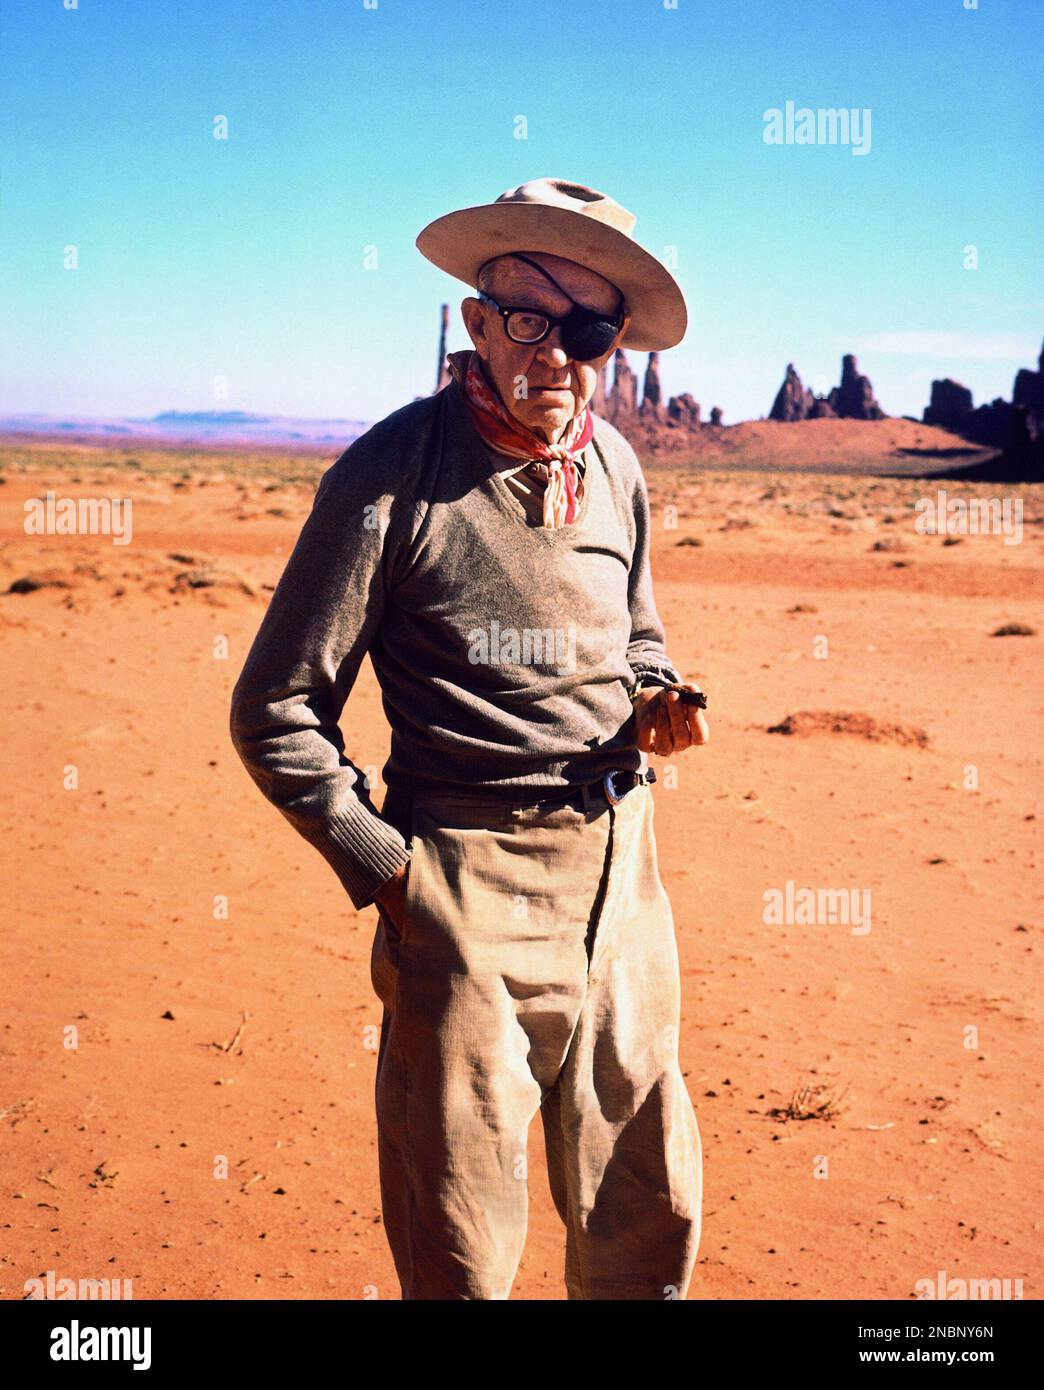 JOHN FORD in CHEYENNE AUTUMN (1964), directed by JOHN FORD. Credit: WARNER BROTHERS / Album Stock Photo